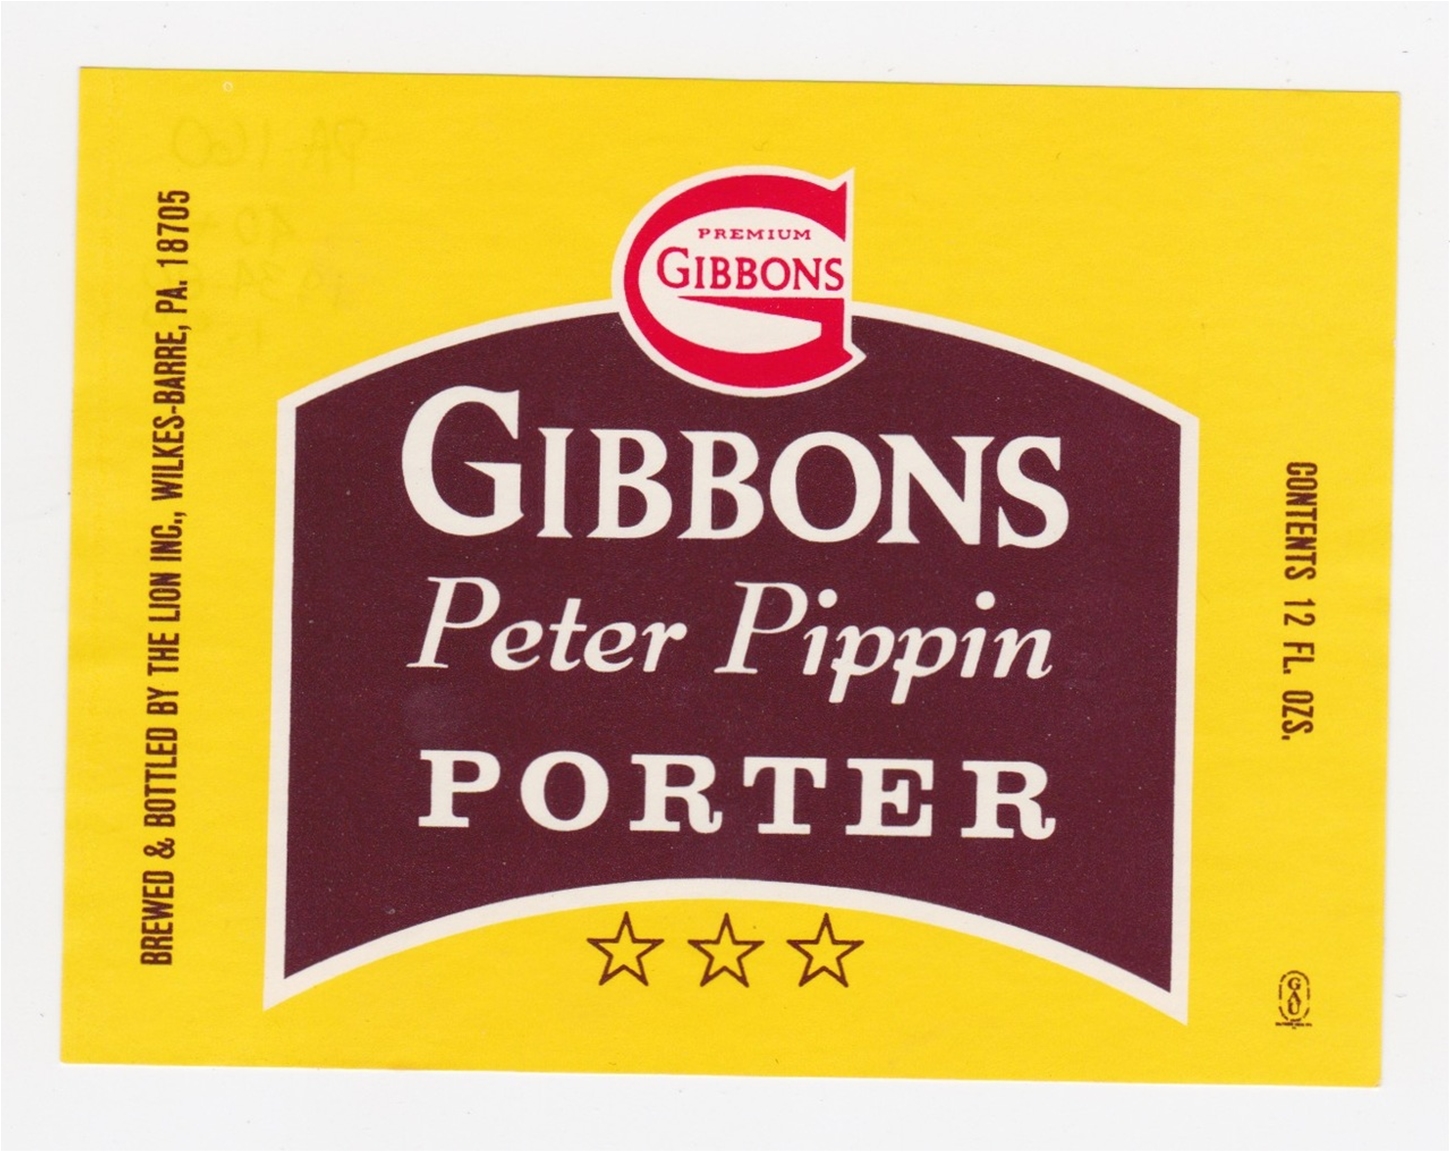 Gibbons Peter Pippin Porter Beer Label